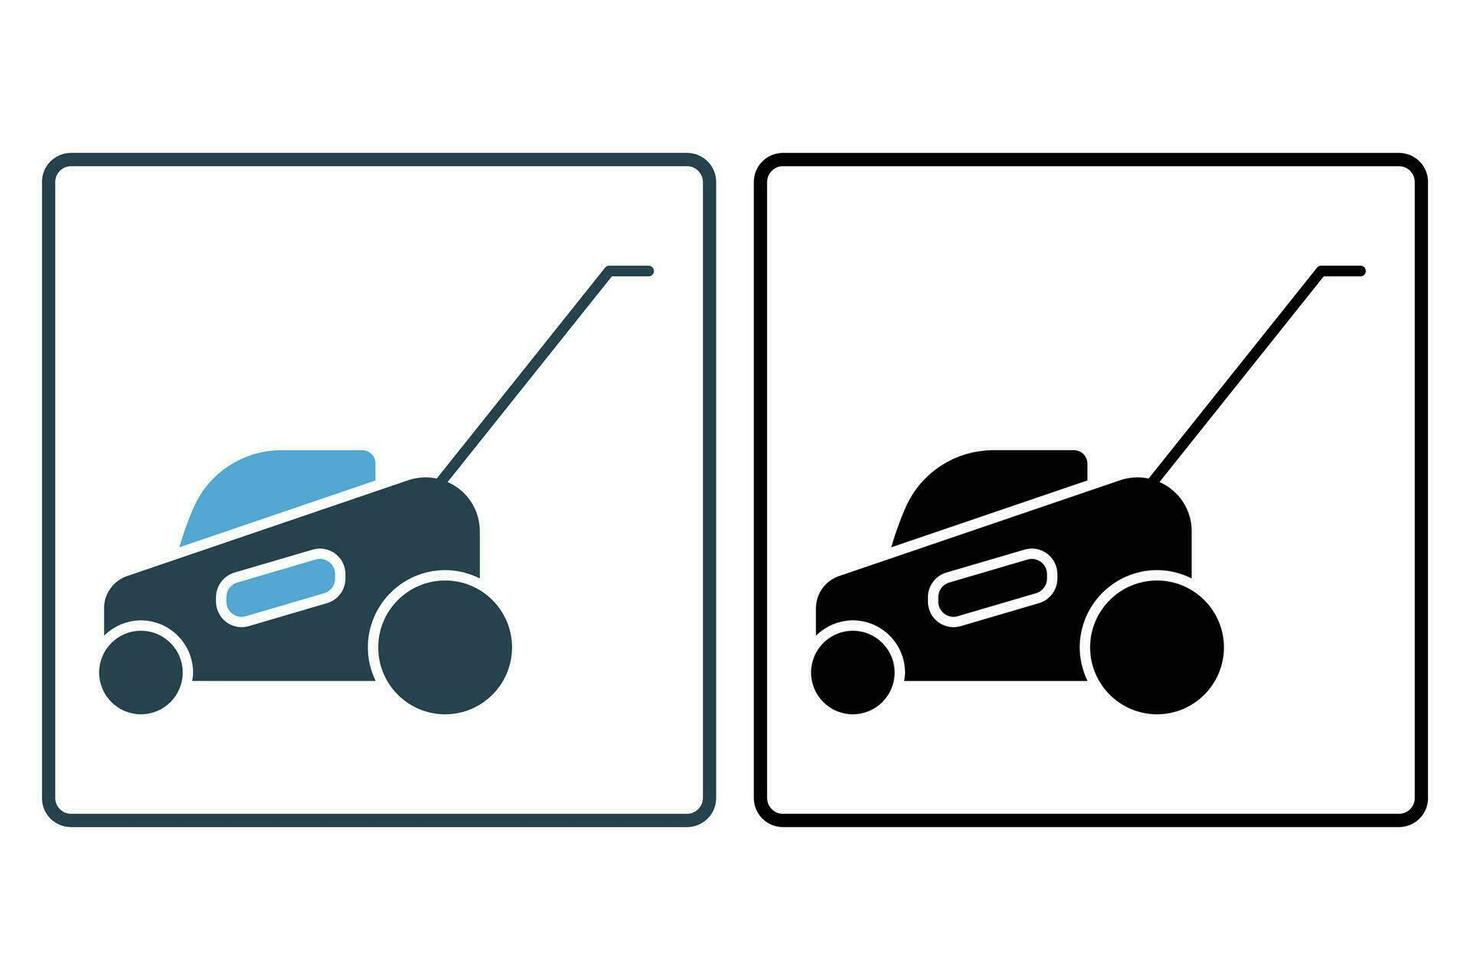 Lawn mower icon. icon related to cleaning, household appliances. Solid icon style design. Simple vector design editable